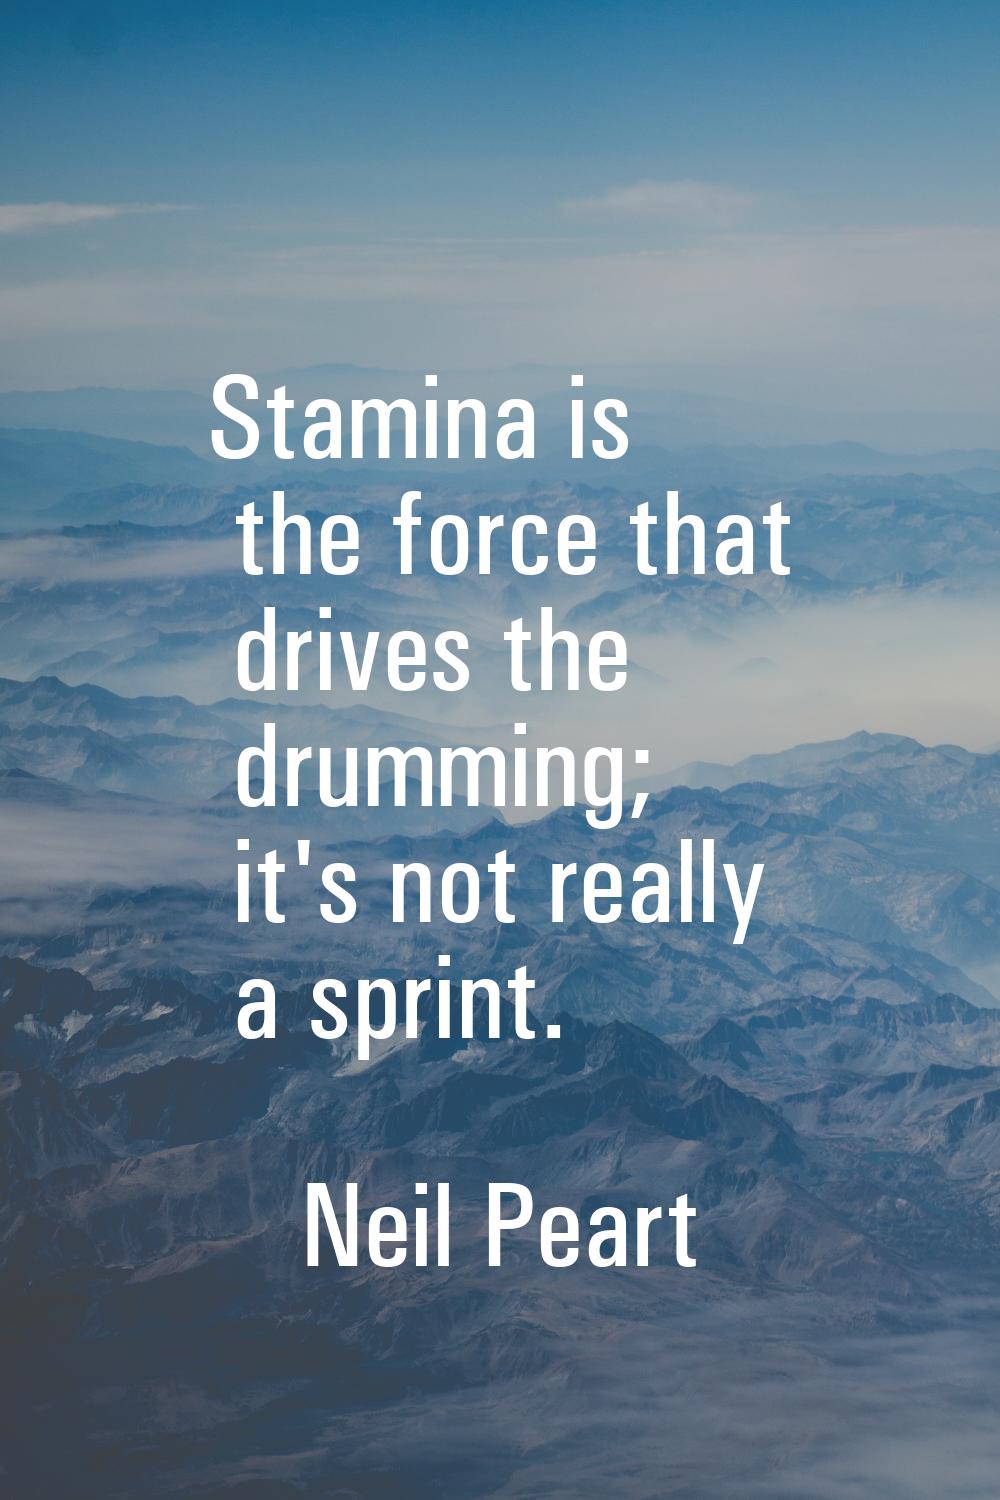 Stamina is the force that drives the drumming; it's not really a sprint.